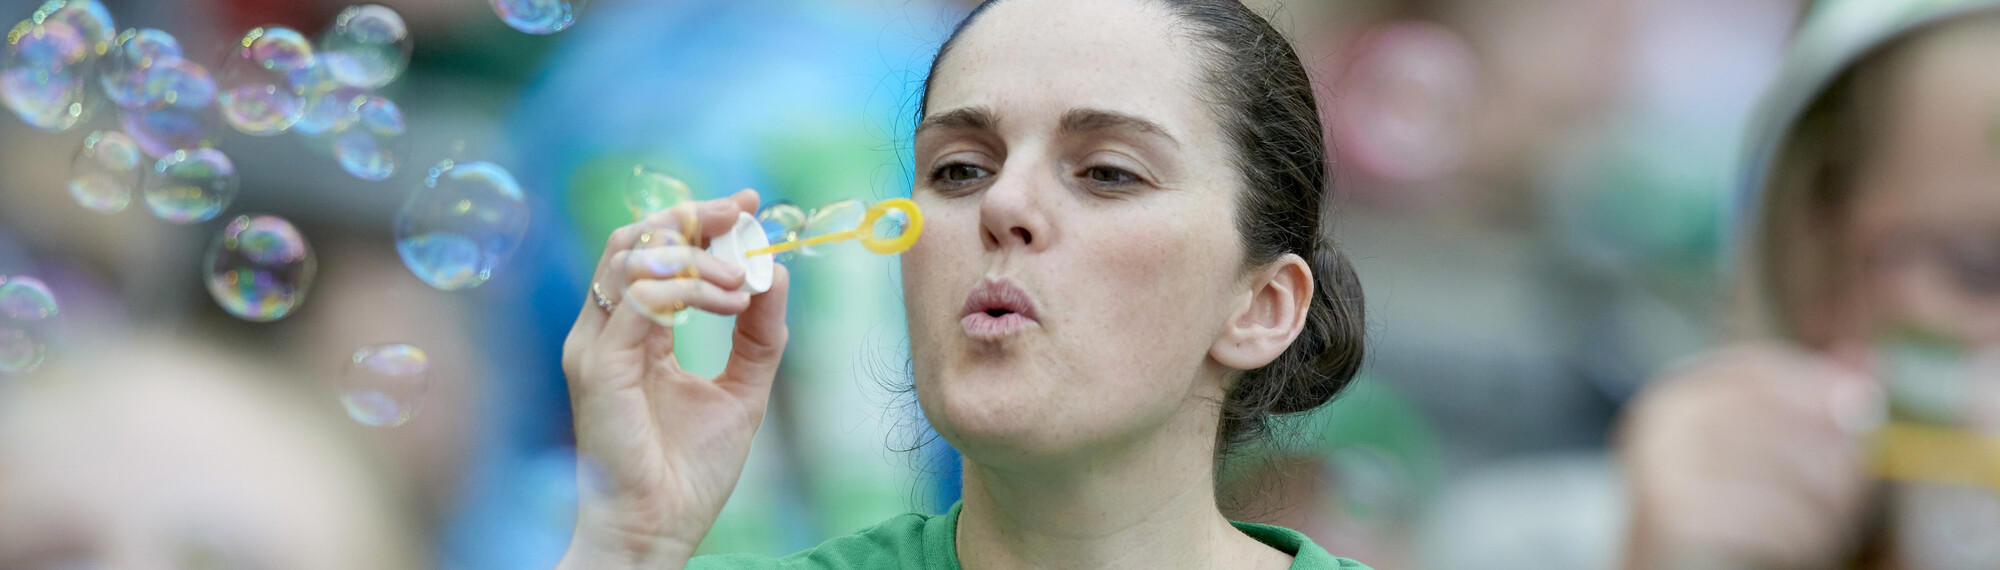 A woman blows bubbles while grinning.